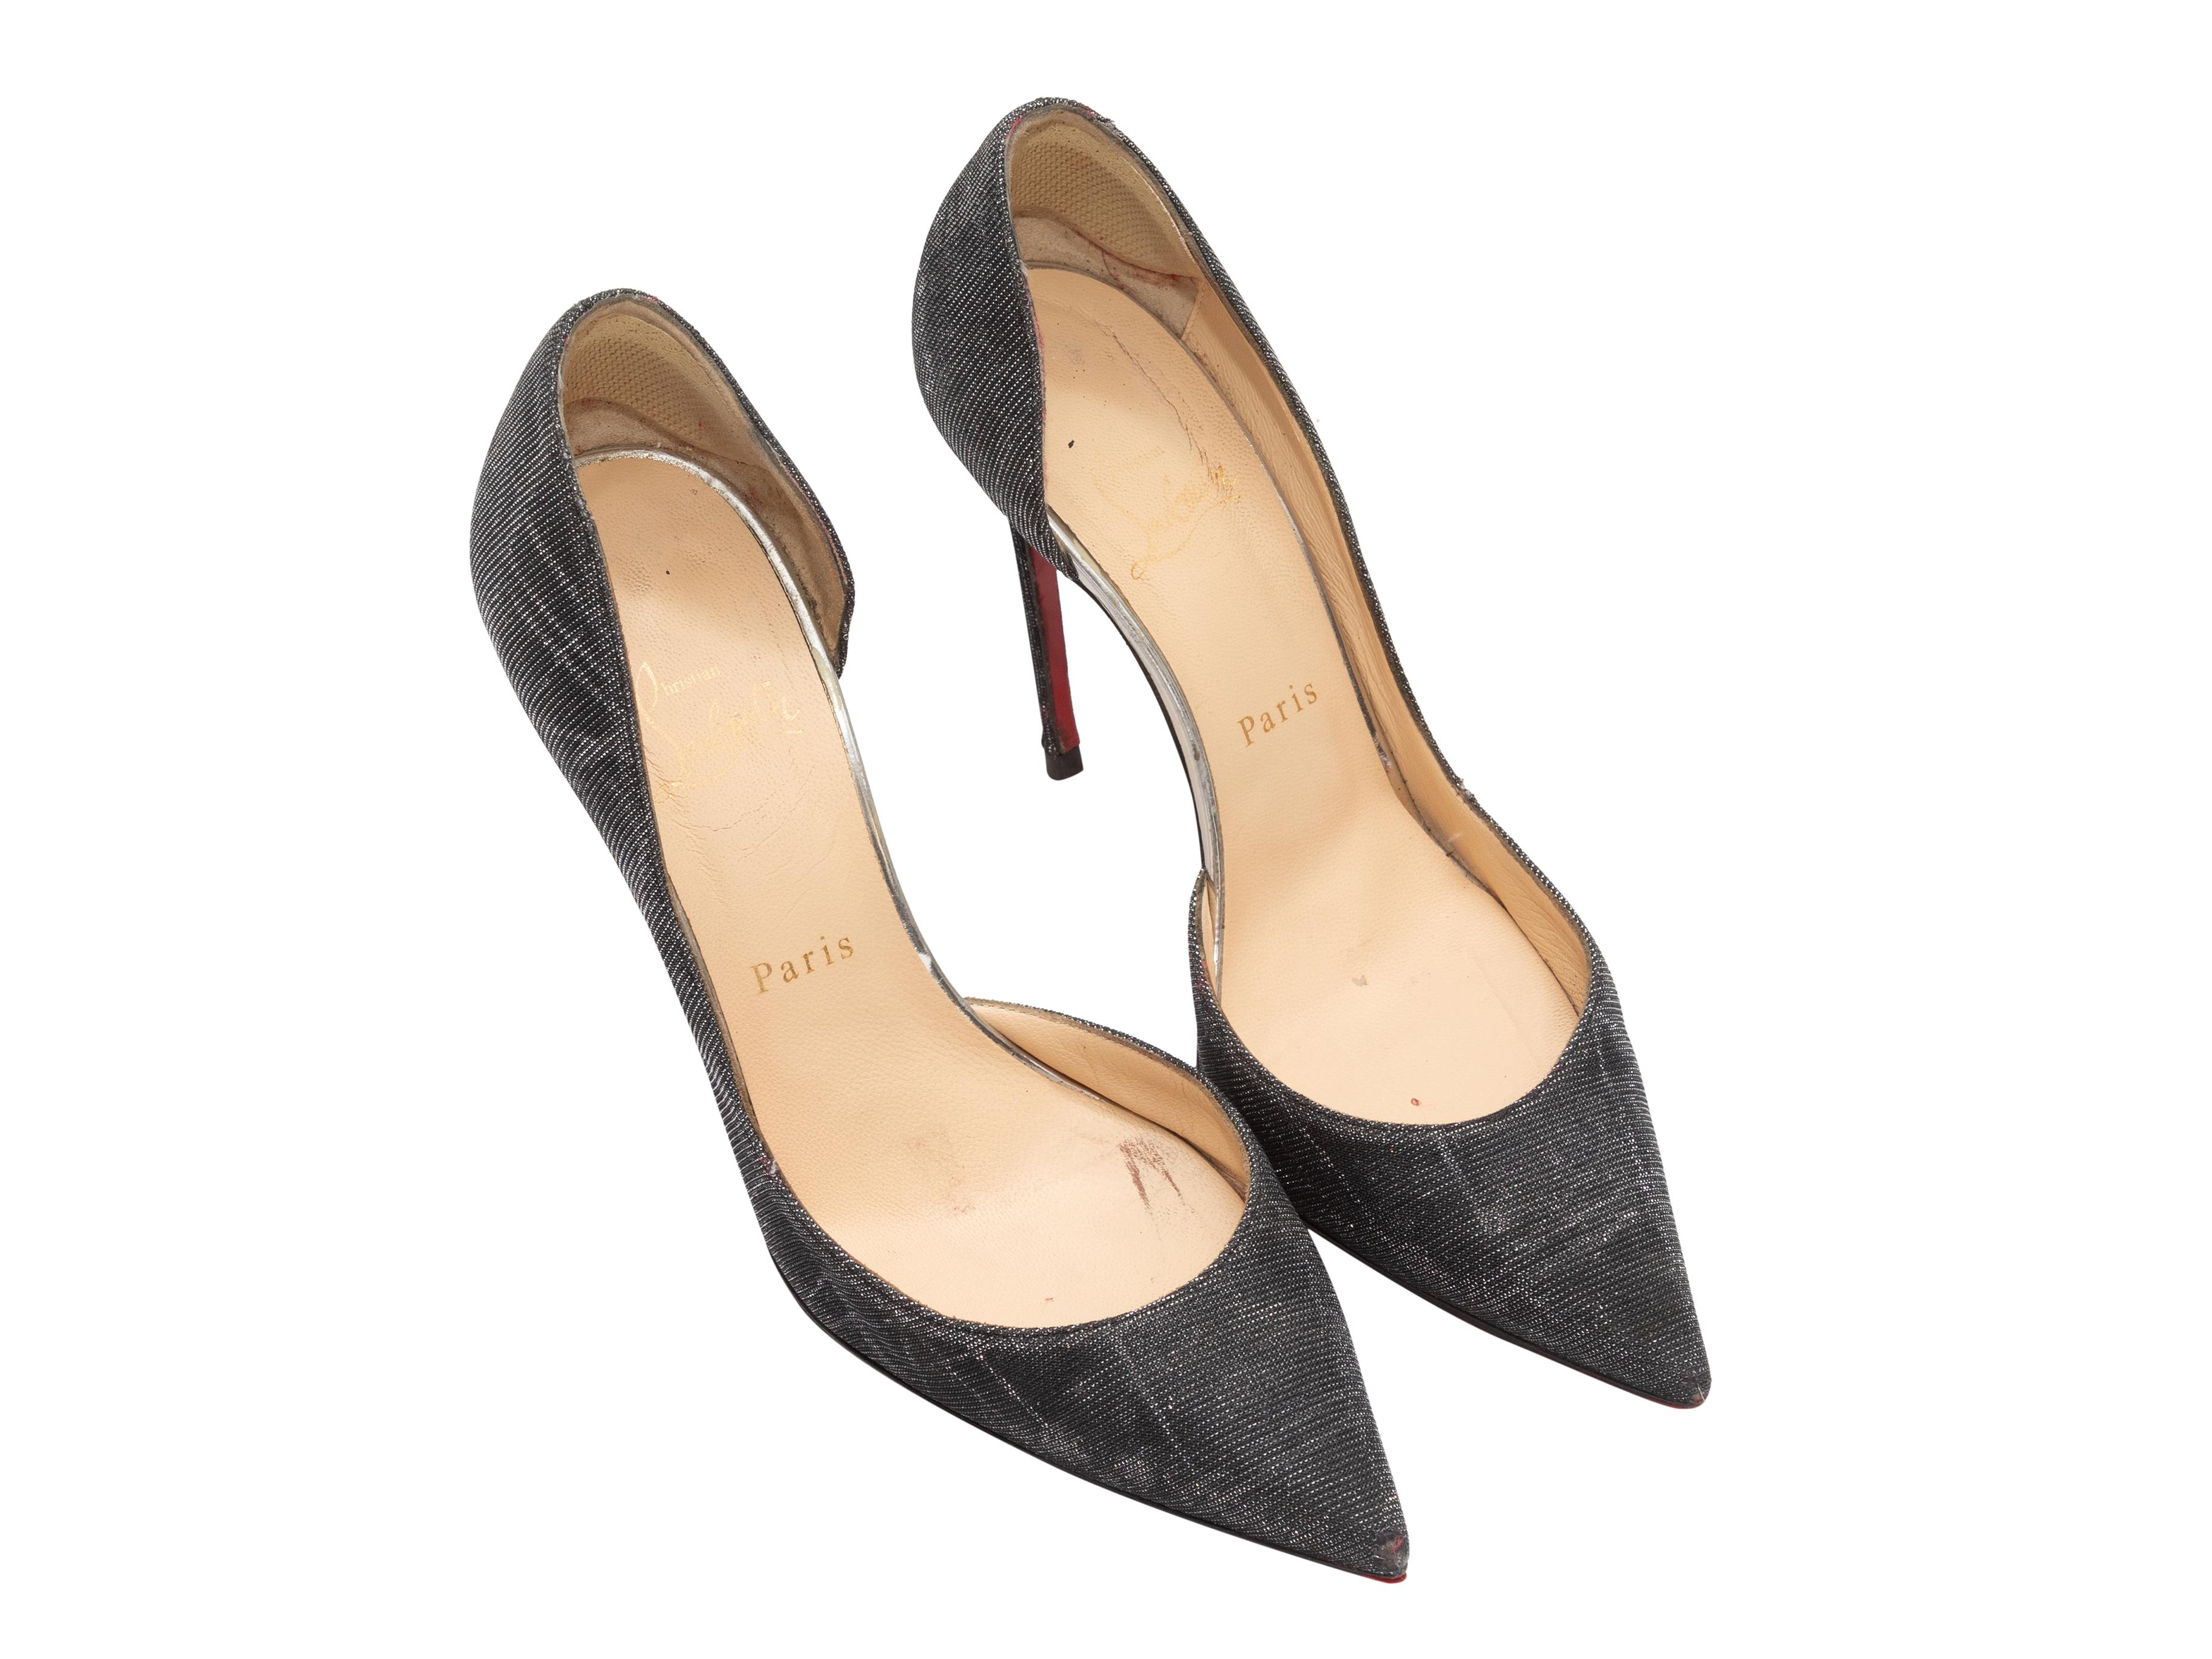 Black and silver metallic pointed-toe heels by Christian Louboutin. 3